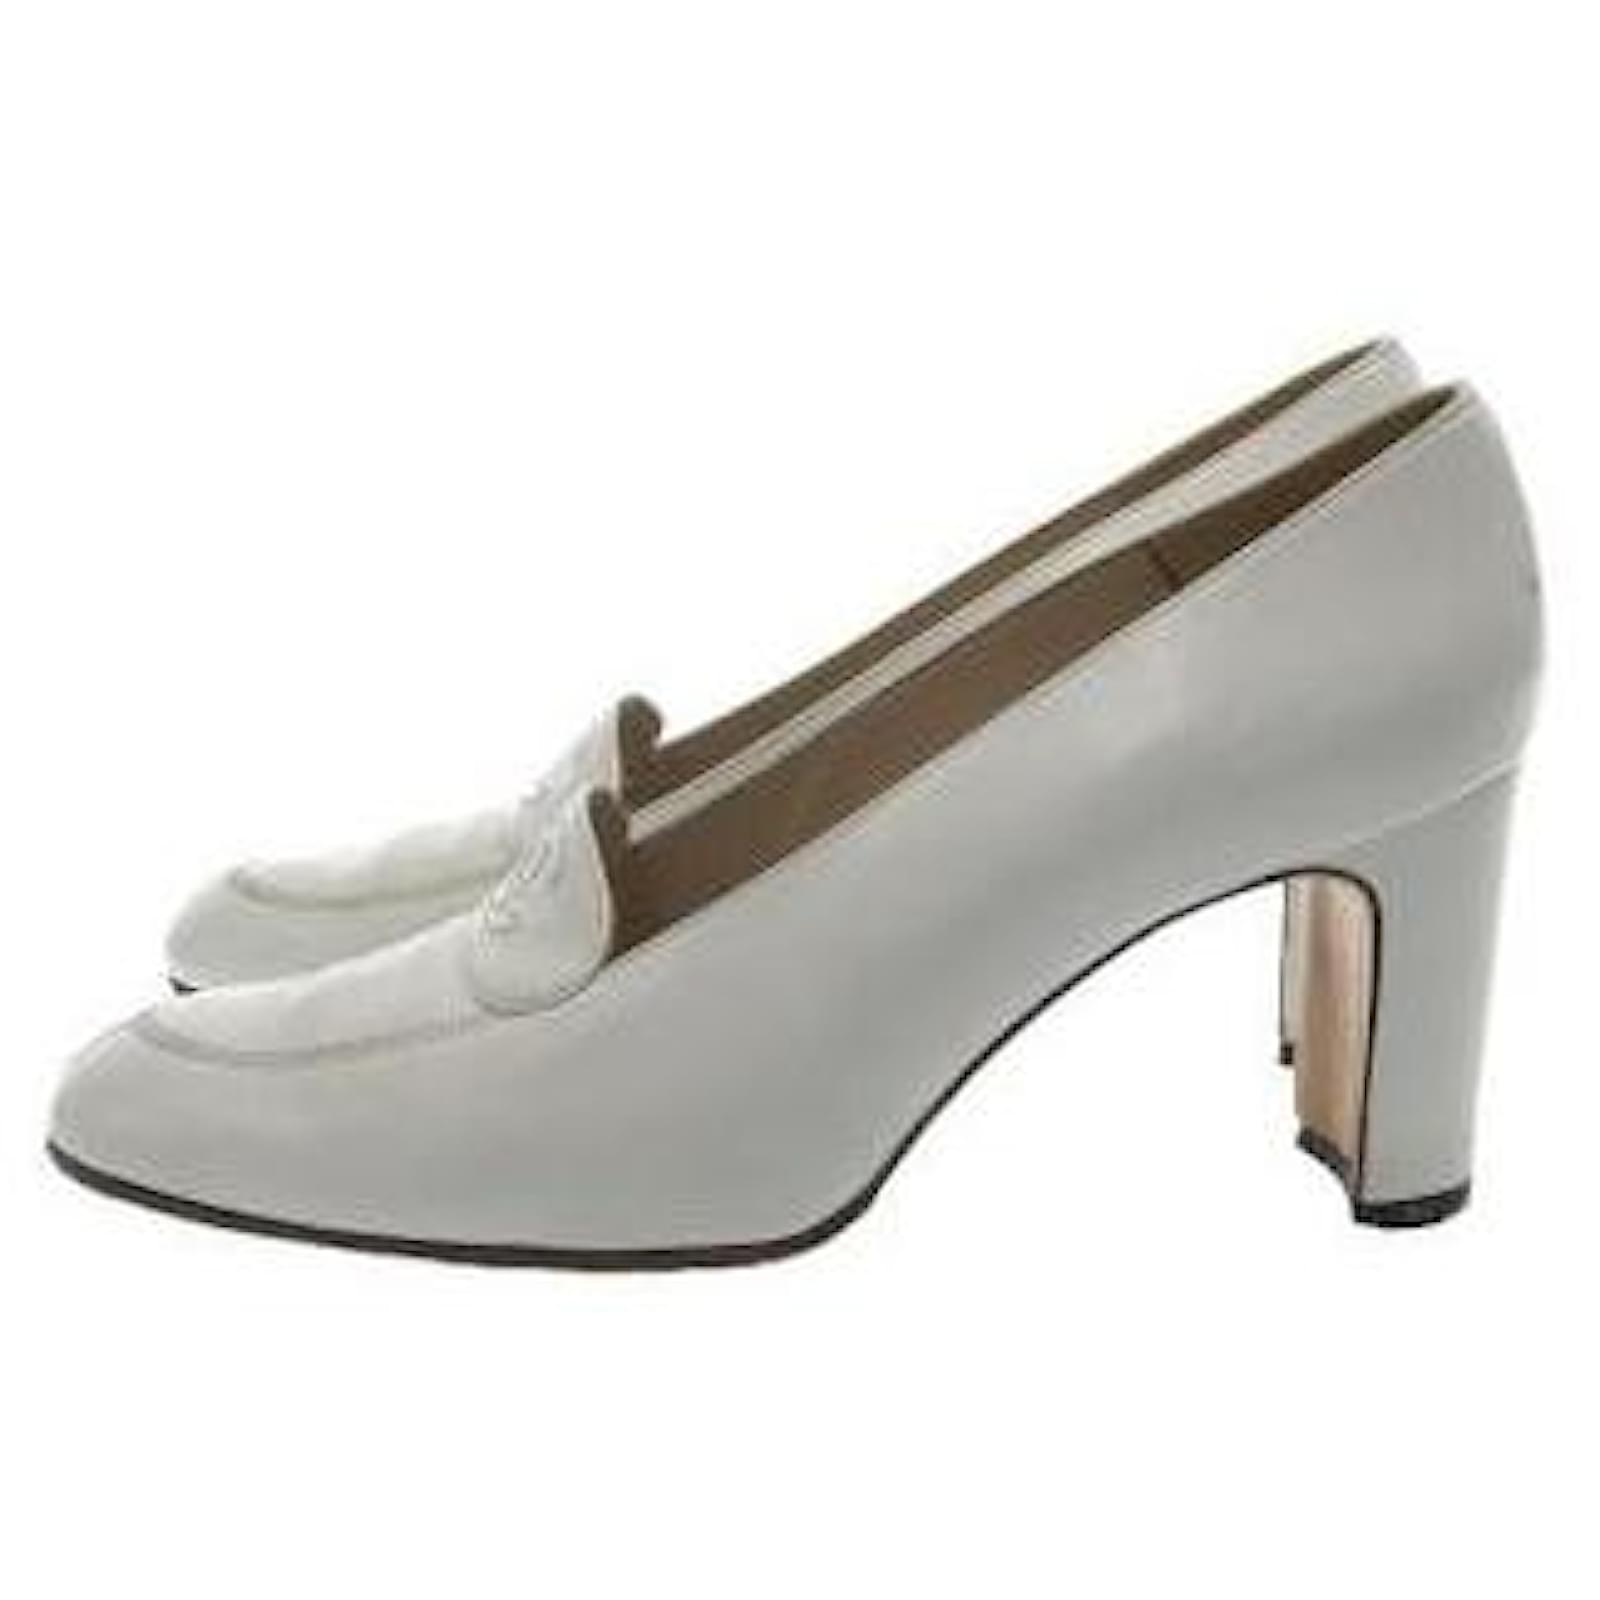 Chanel White Leather CC Pearl Embellished Heel Pumps